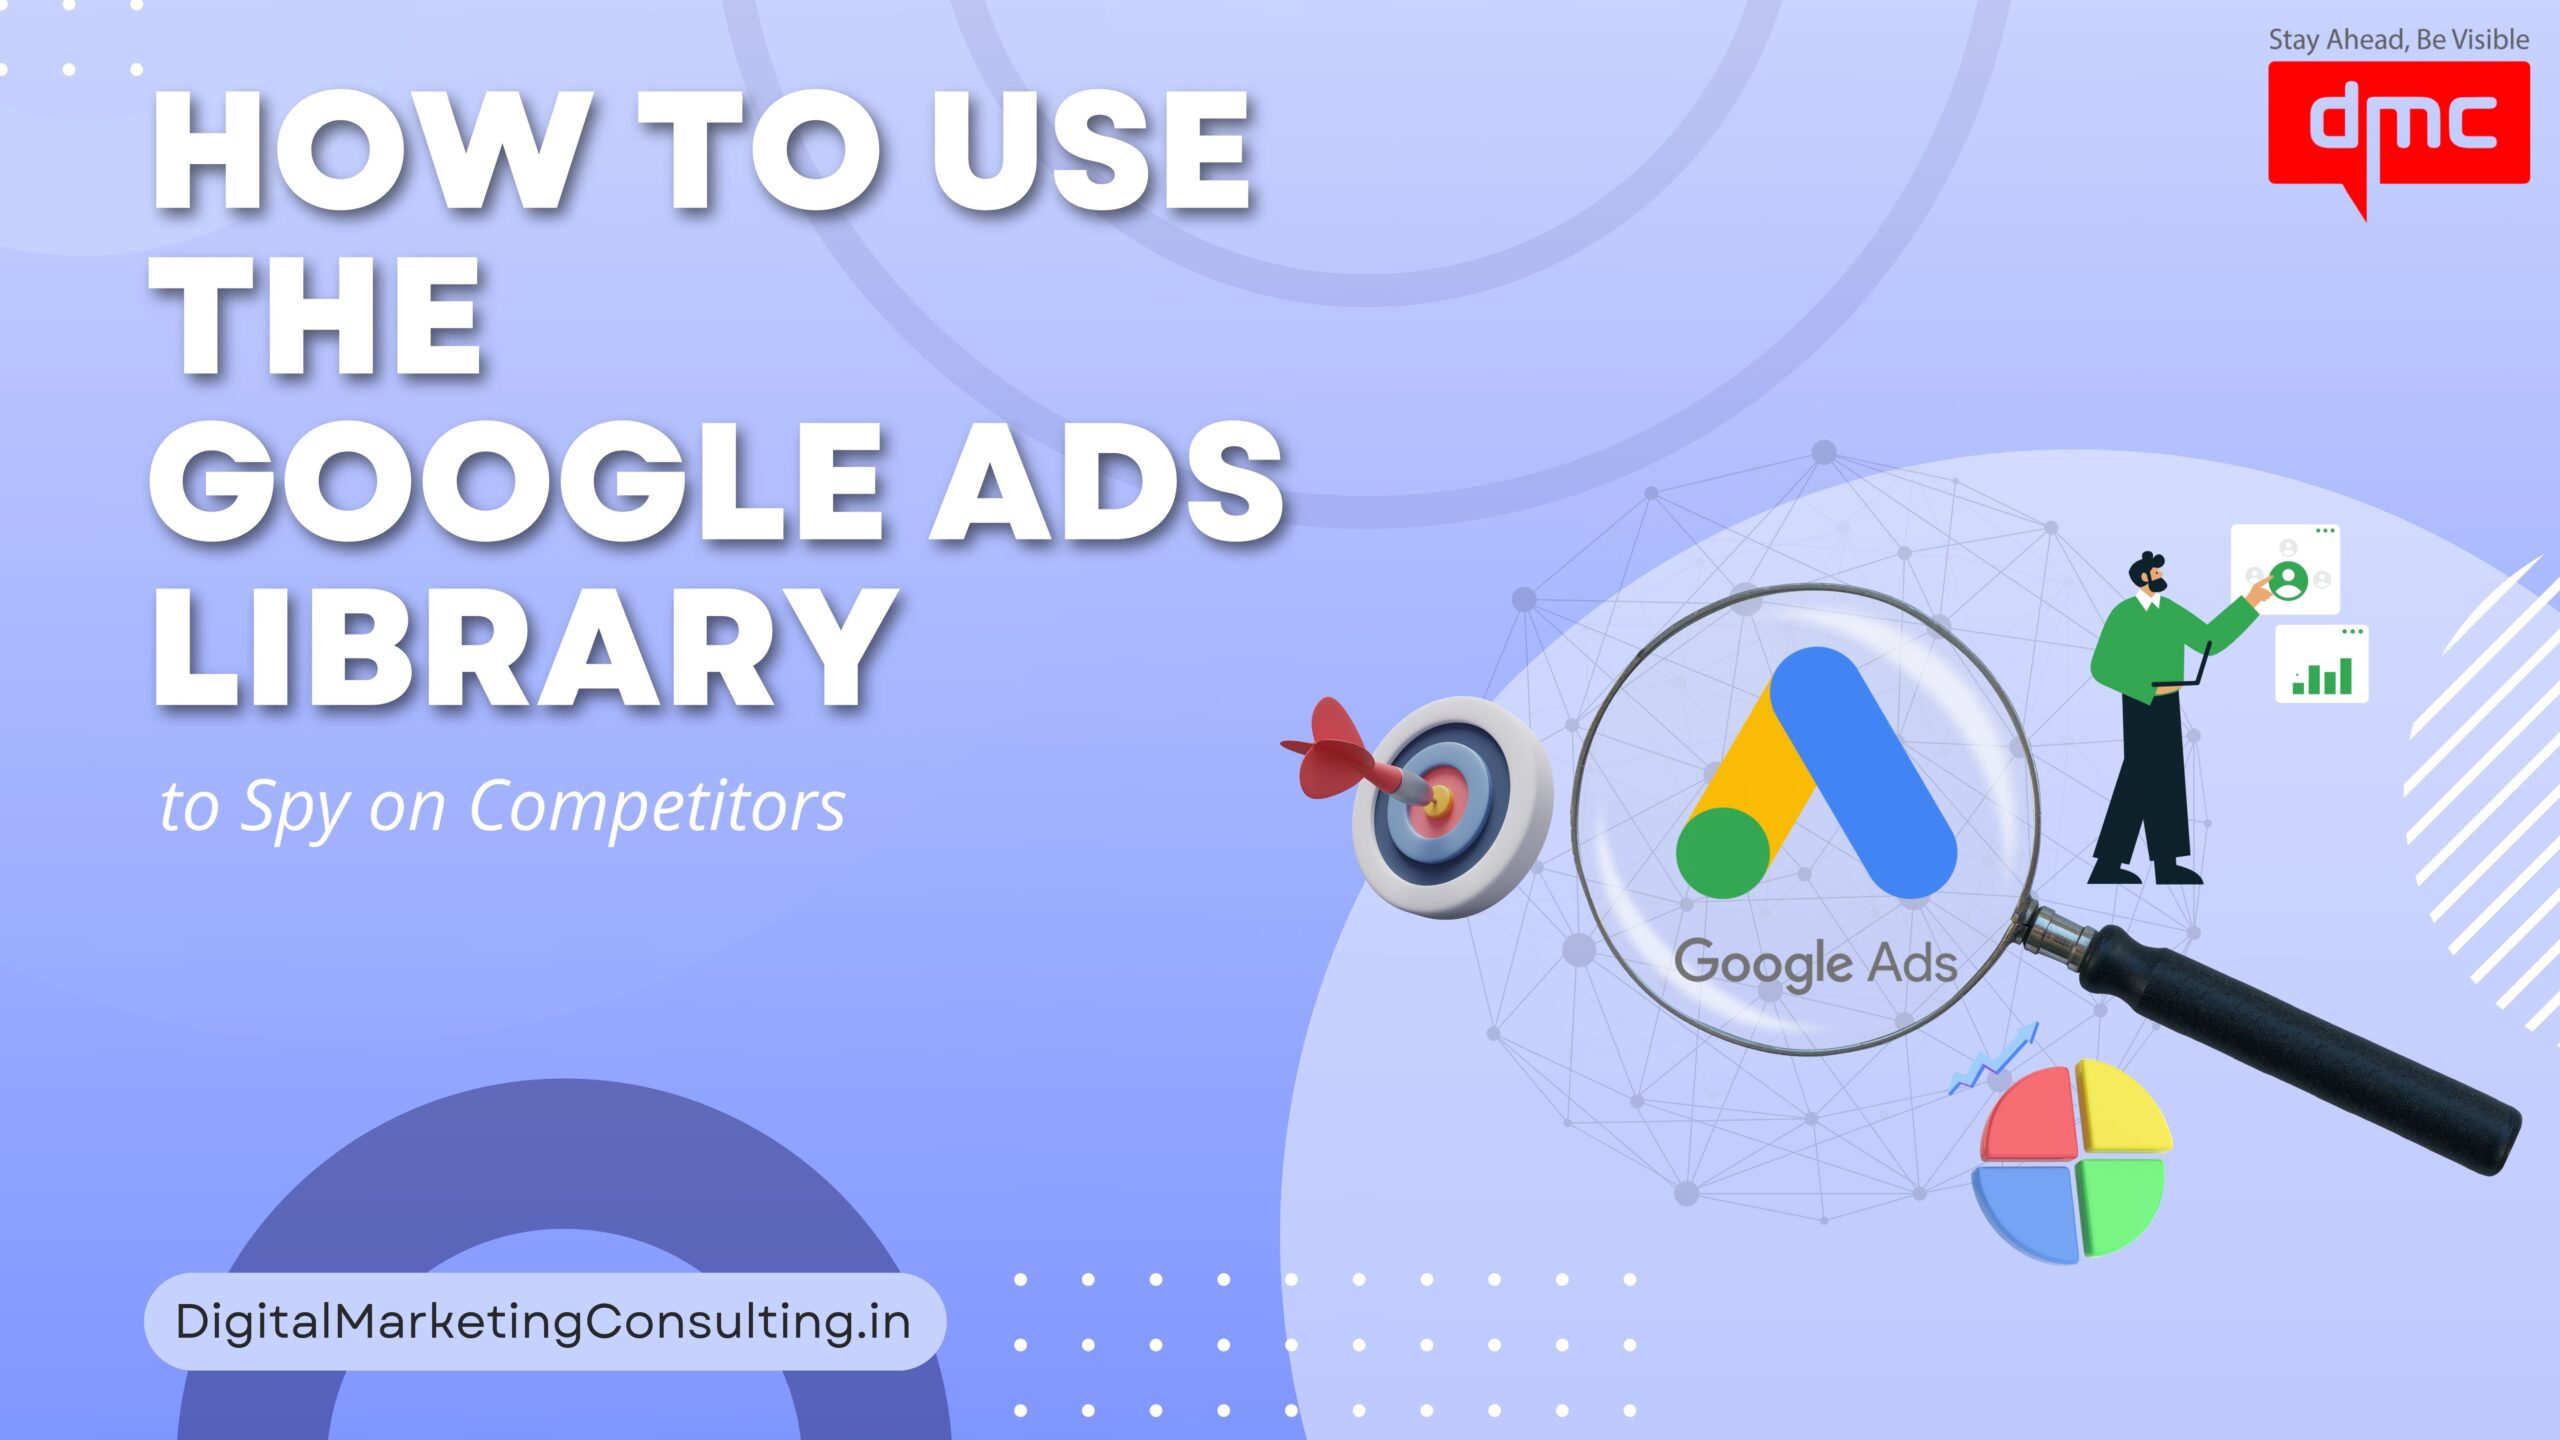 How to Use the Google Ads Library to Spy on Competitors